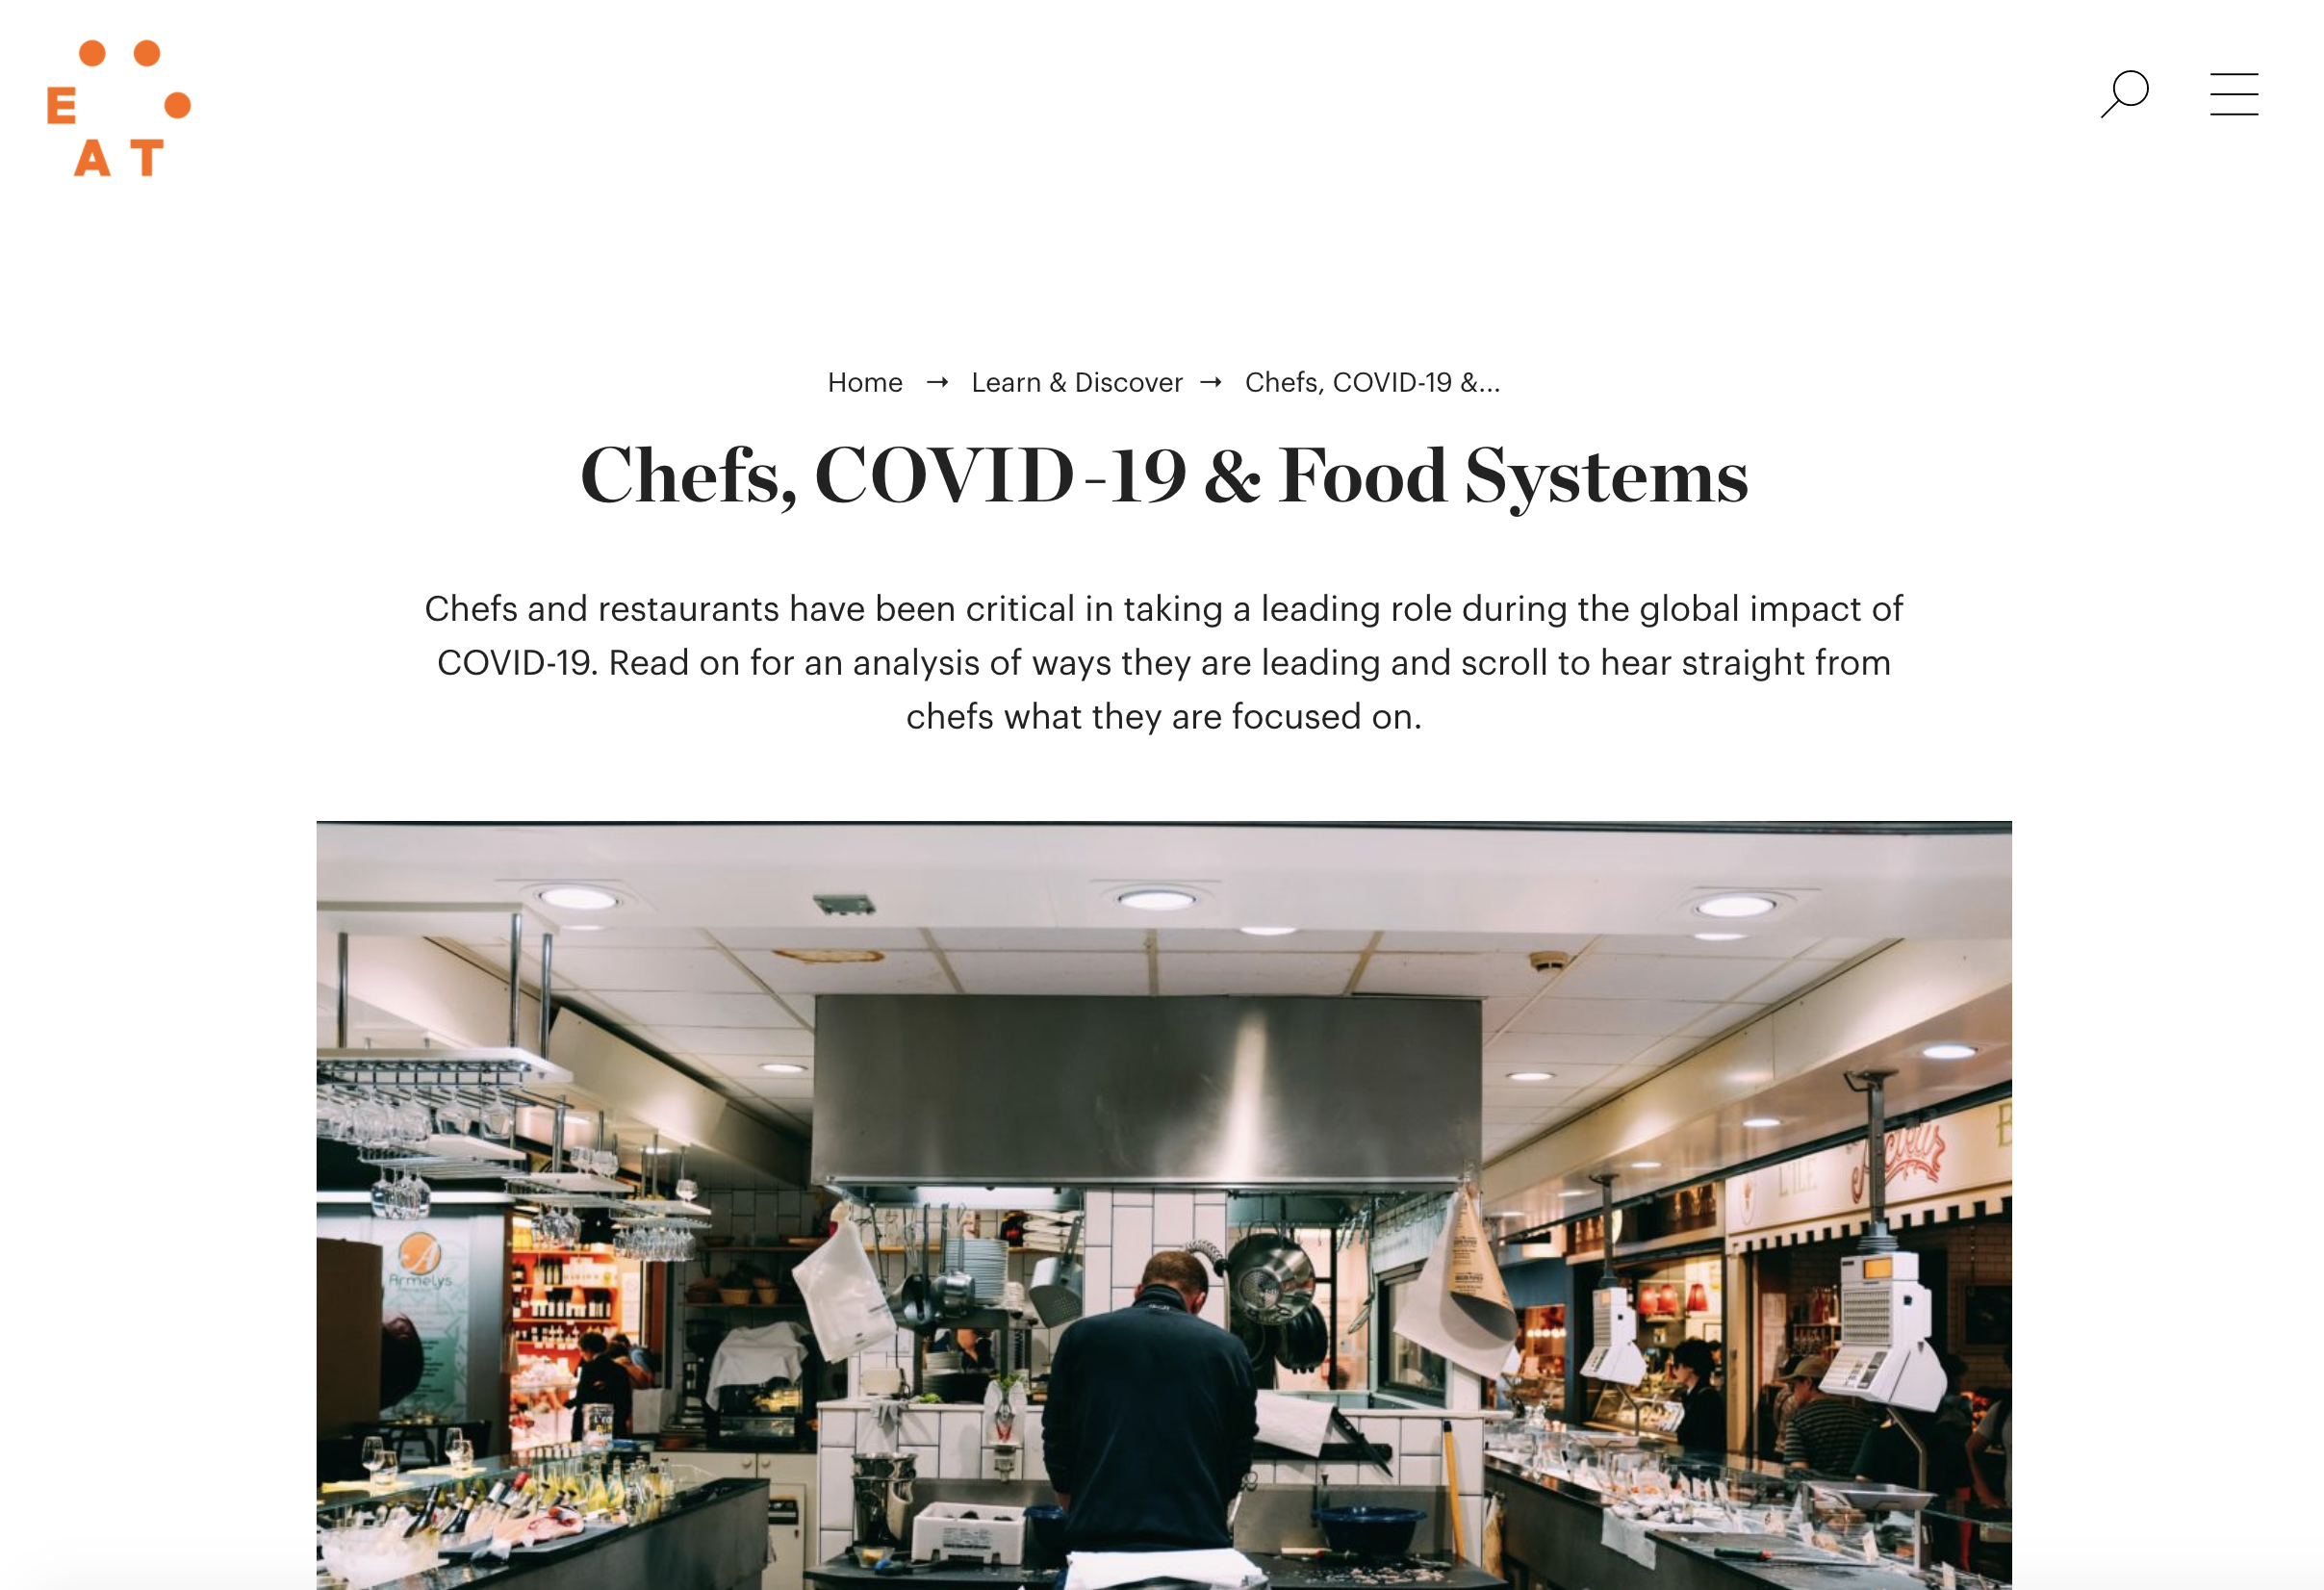 Chefs, COVID-19 & Food Systems